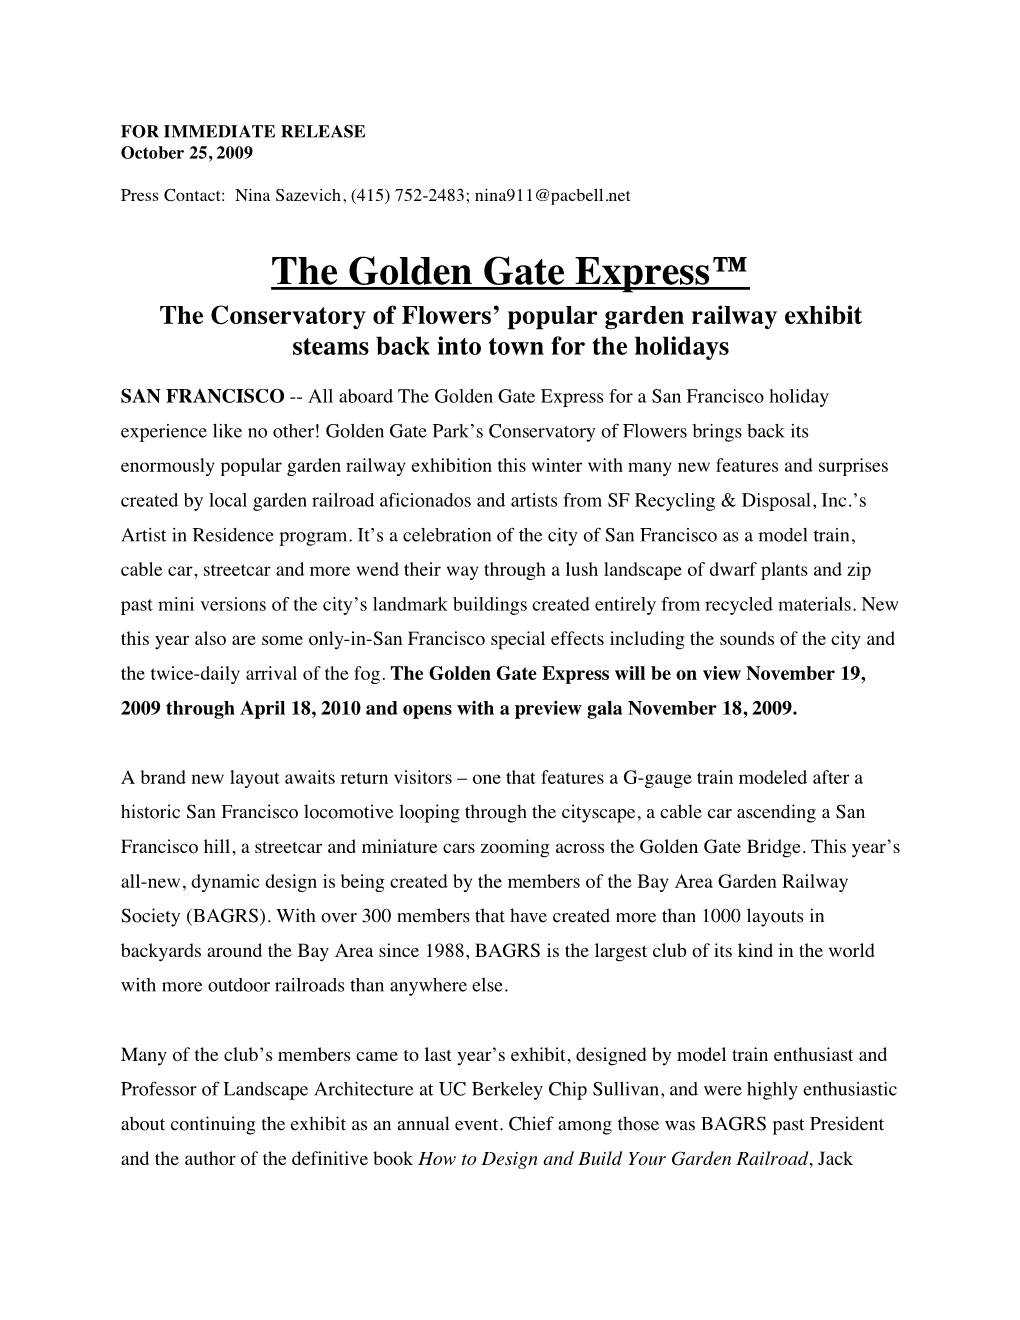 The Golden Gate Express™ the Conservatory of Flowers’ Popular Garden Railway Exhibit Steams Back Into Town for the Holidays